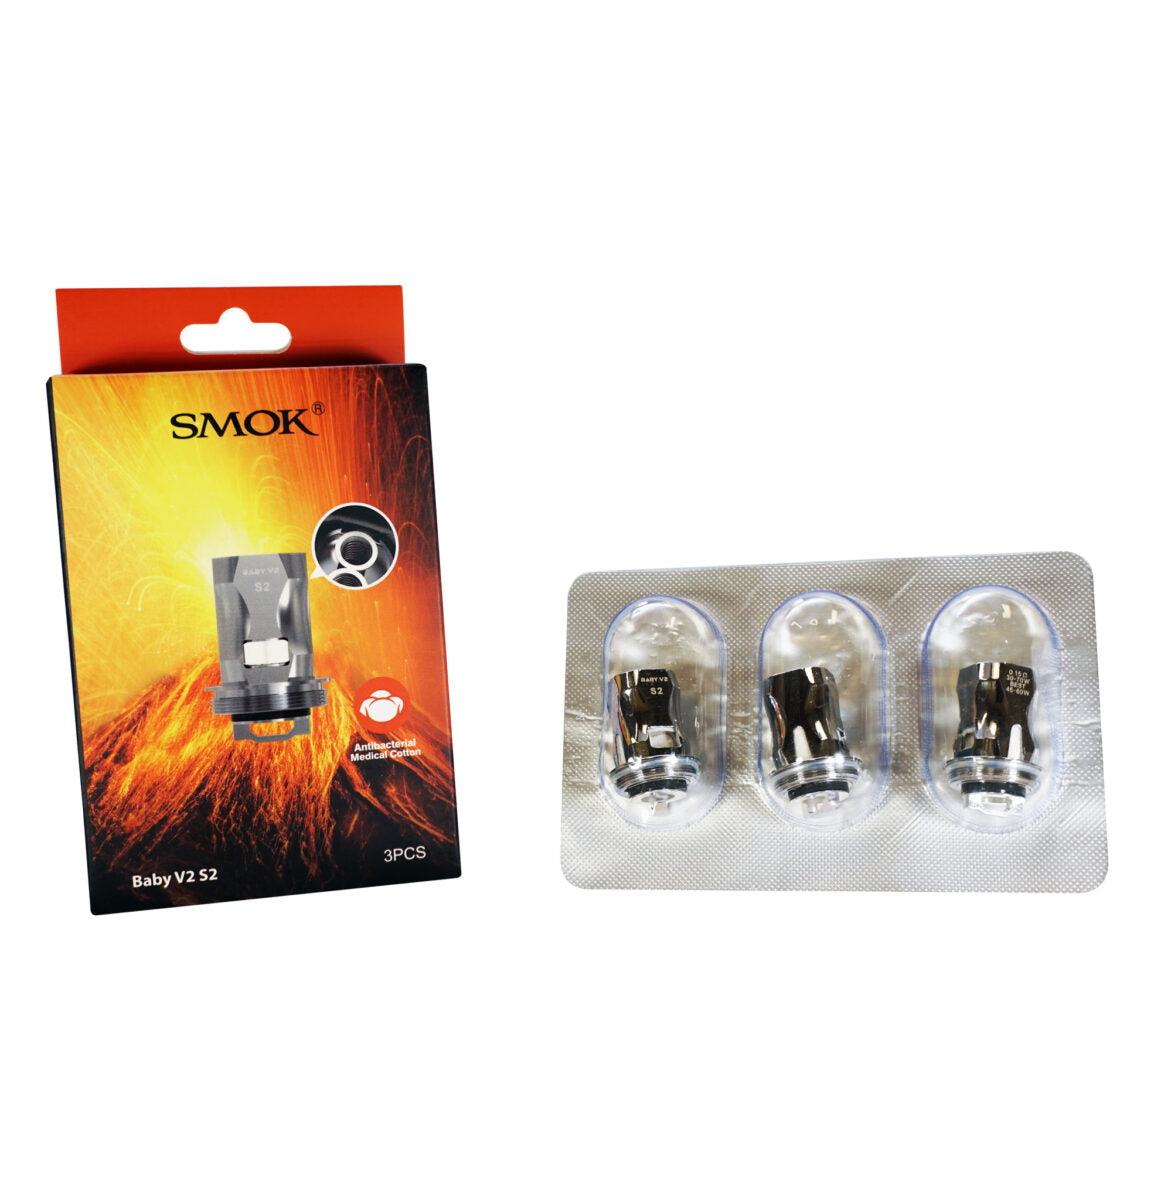 SMOK TFV8 Baby V2 Coils S2 3-Pack with packaging